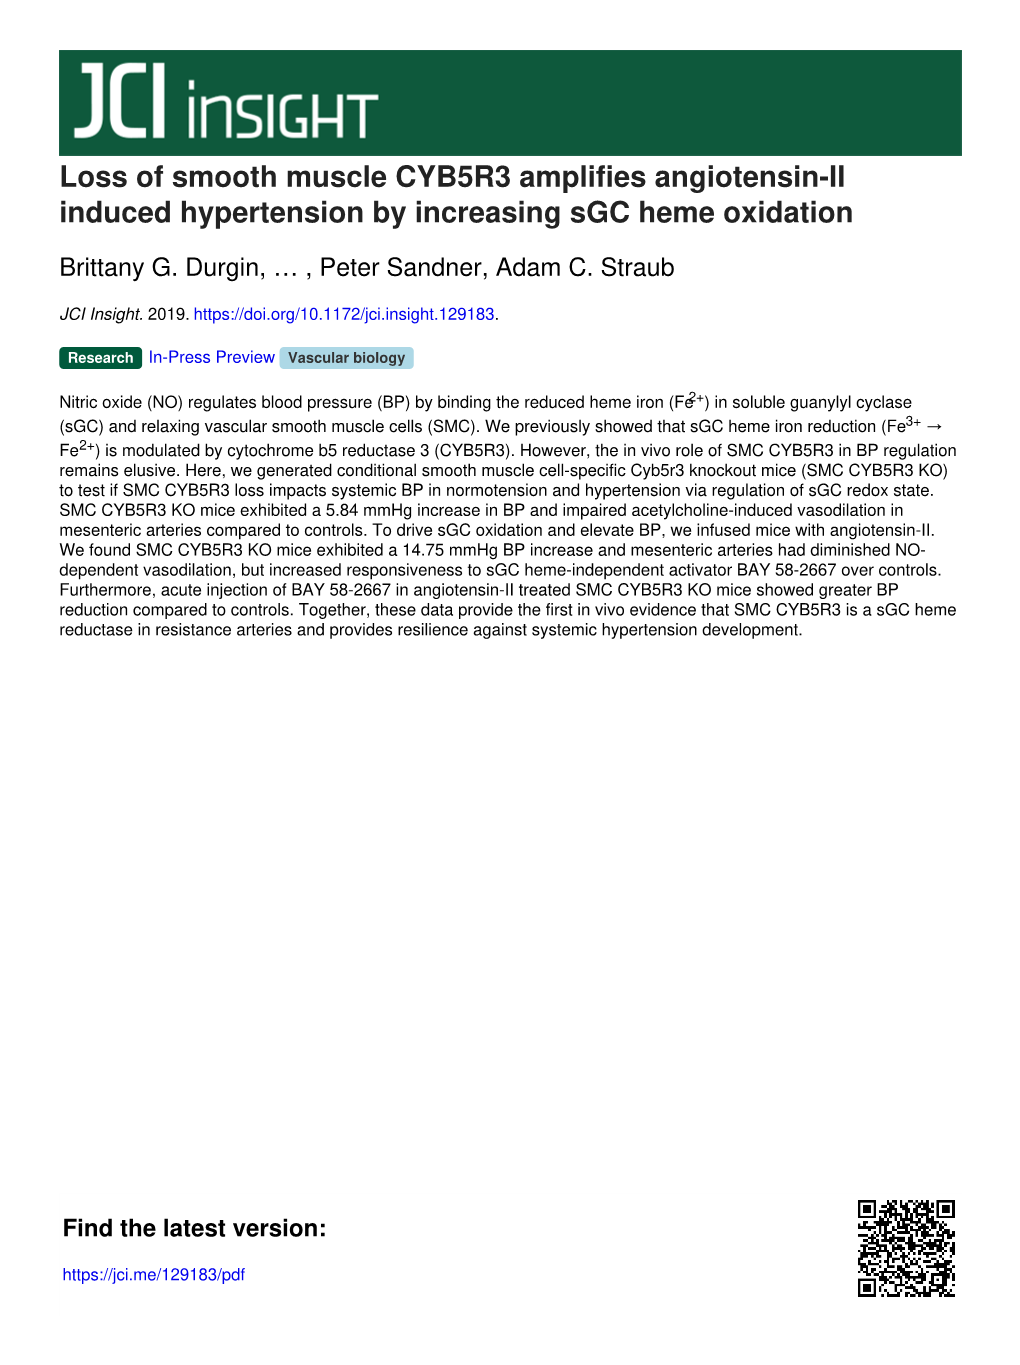 Loss of Smooth Muscle CYB5R3 Amplifies Angiotensin-II Induced Hypertension by Increasing Sgc Heme Oxidation